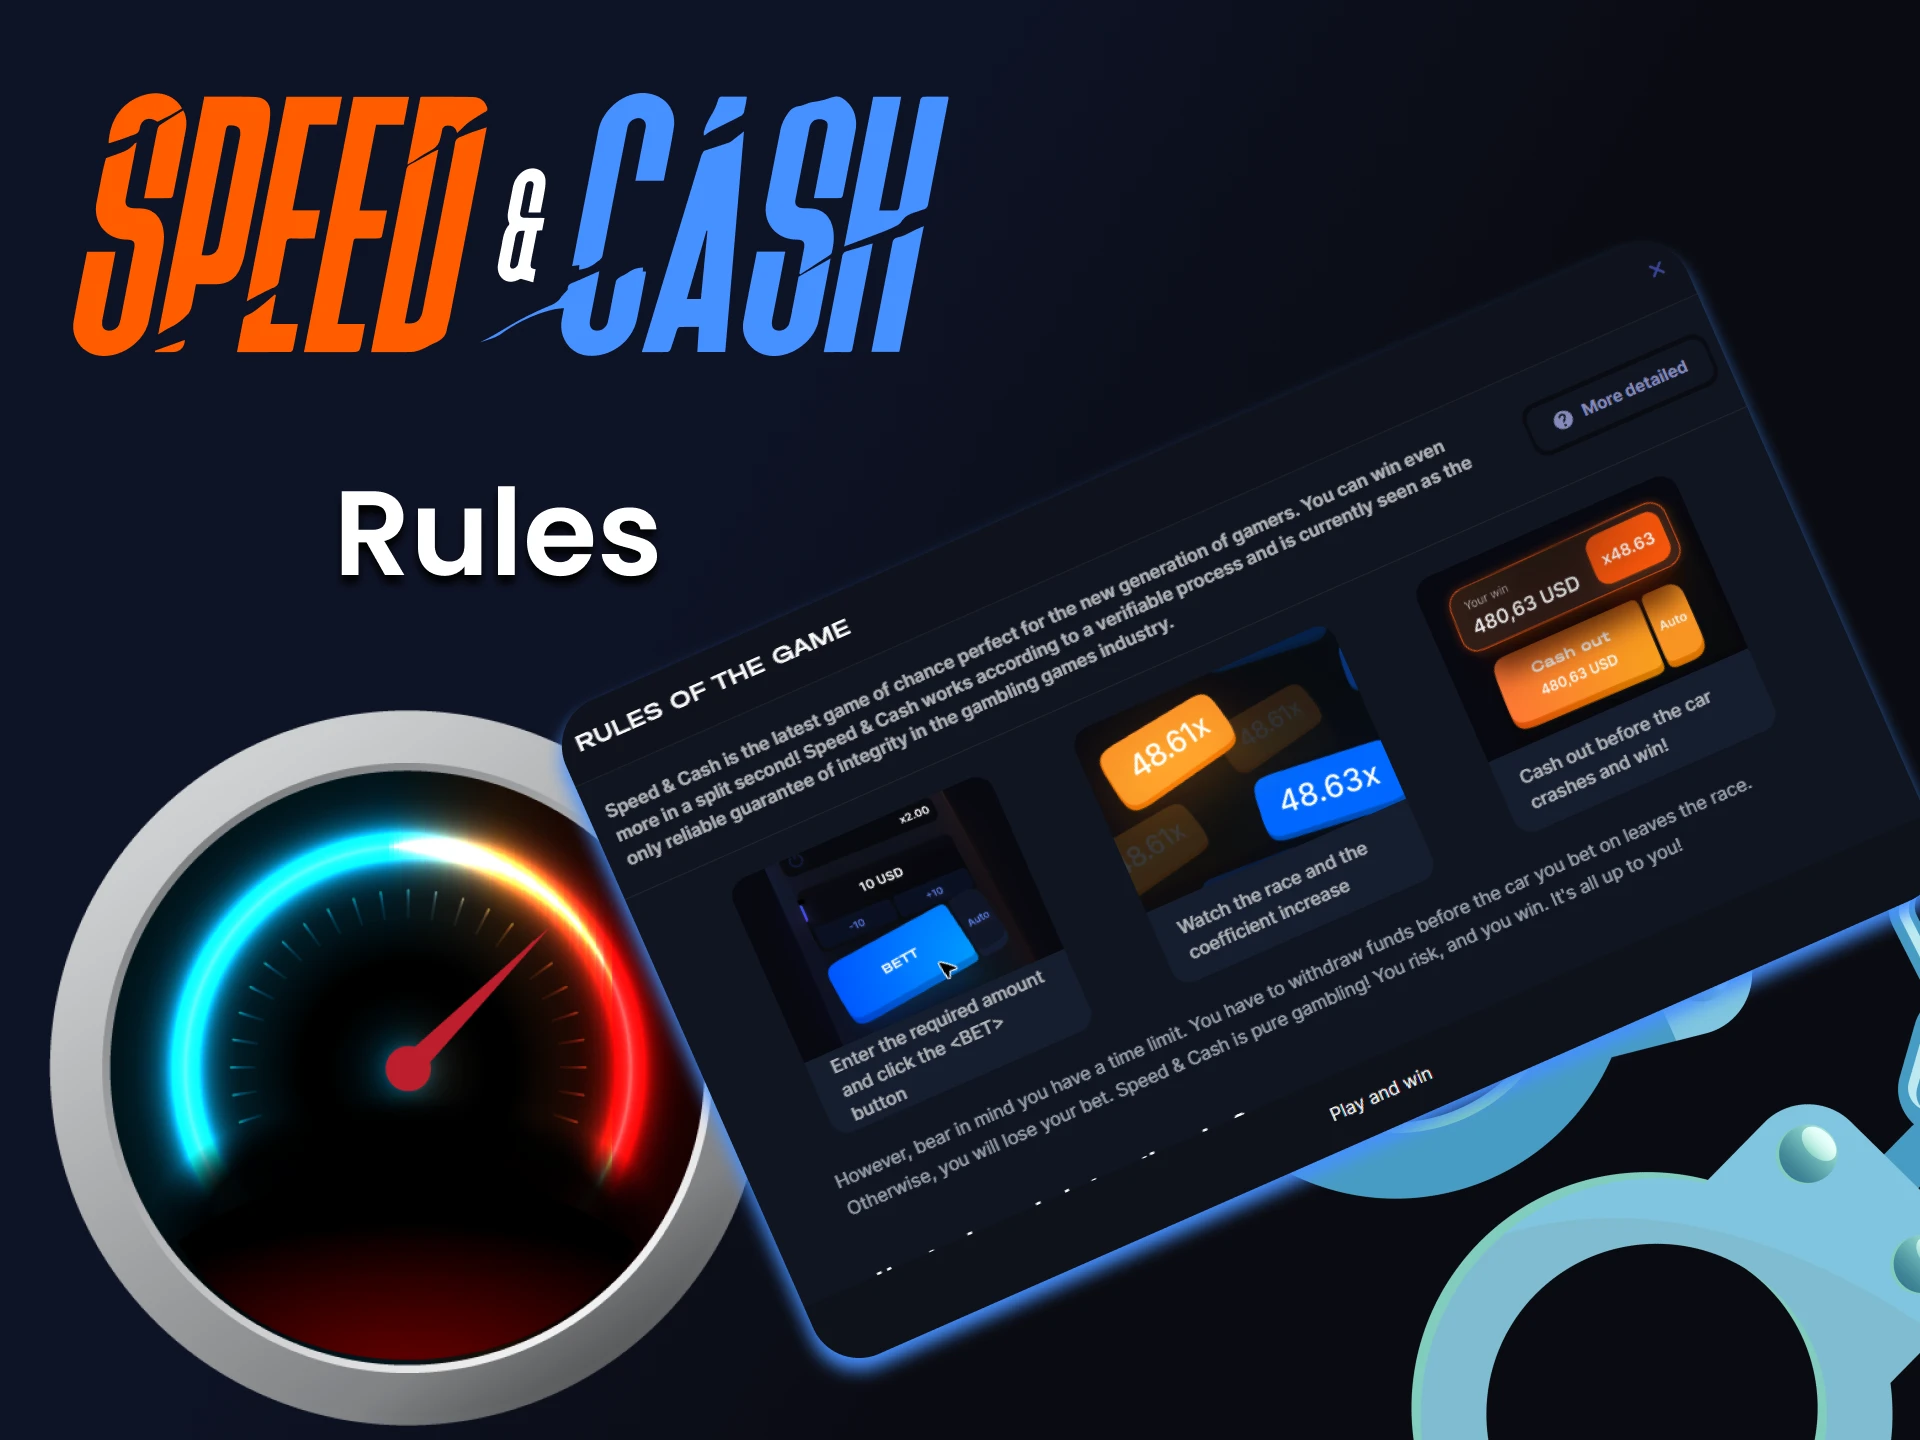 Learn the rules of the Speed&Cash game.